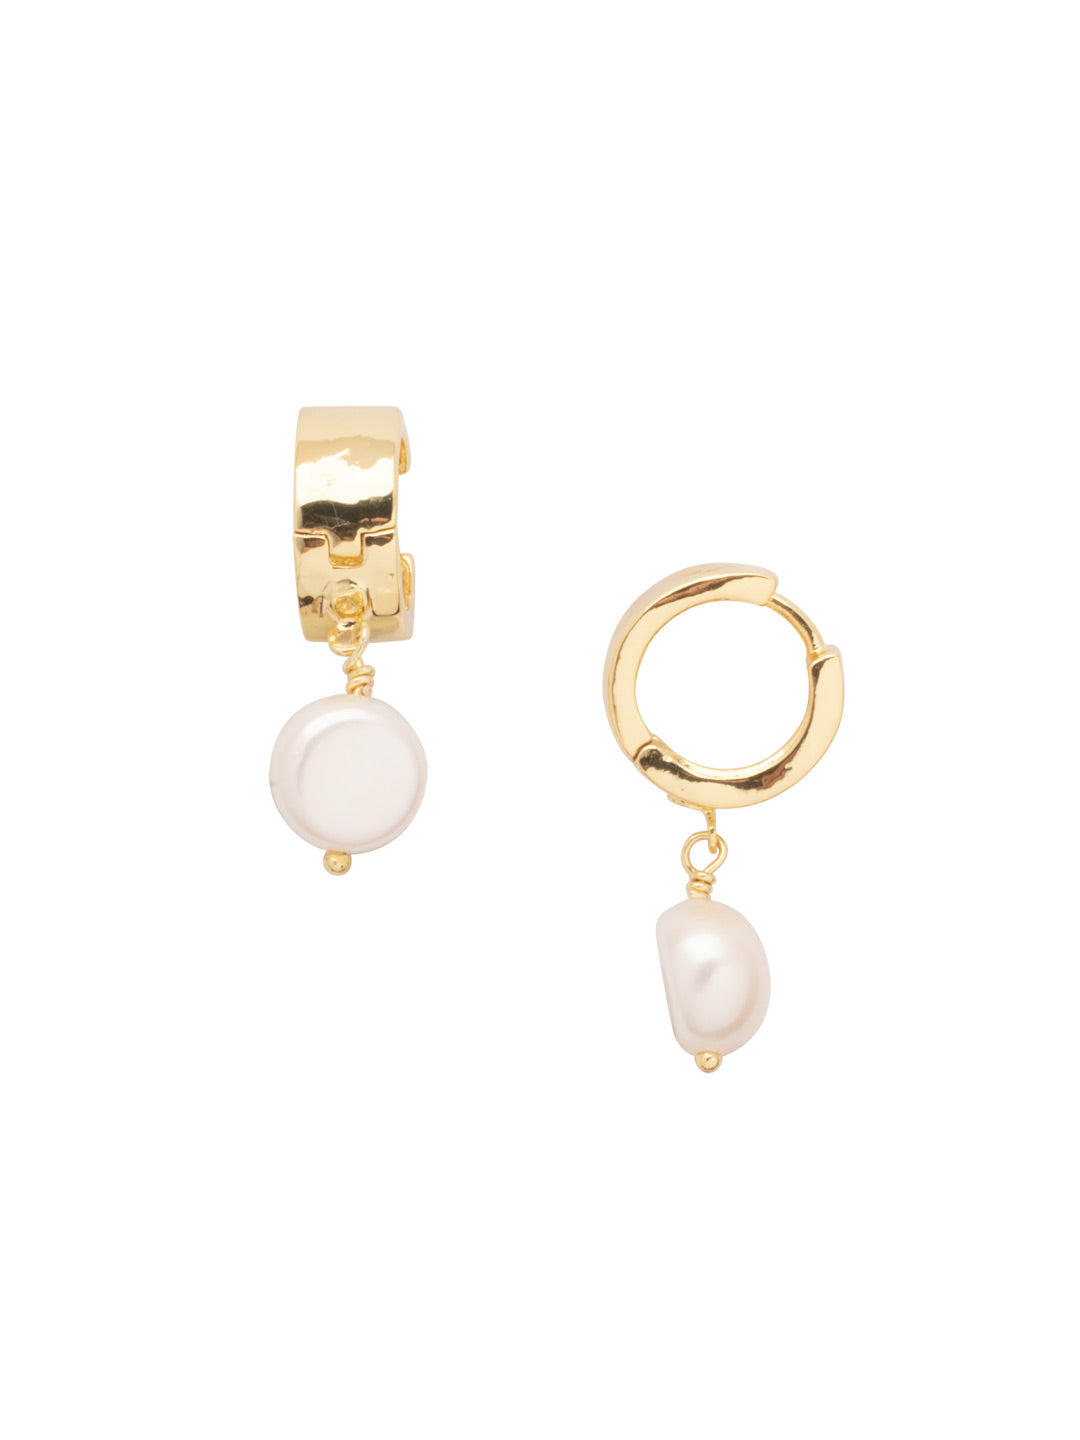 Pearl Huggie Hoop Earrings - 4EFL17BGMDP - <p>The Pearl Huggie Hoop Earrings feature a freshwater pearl dangling from a small huggie hoop. From Sorrelli's Modern Pearl collection in our Bright Gold-tone finish.</p>